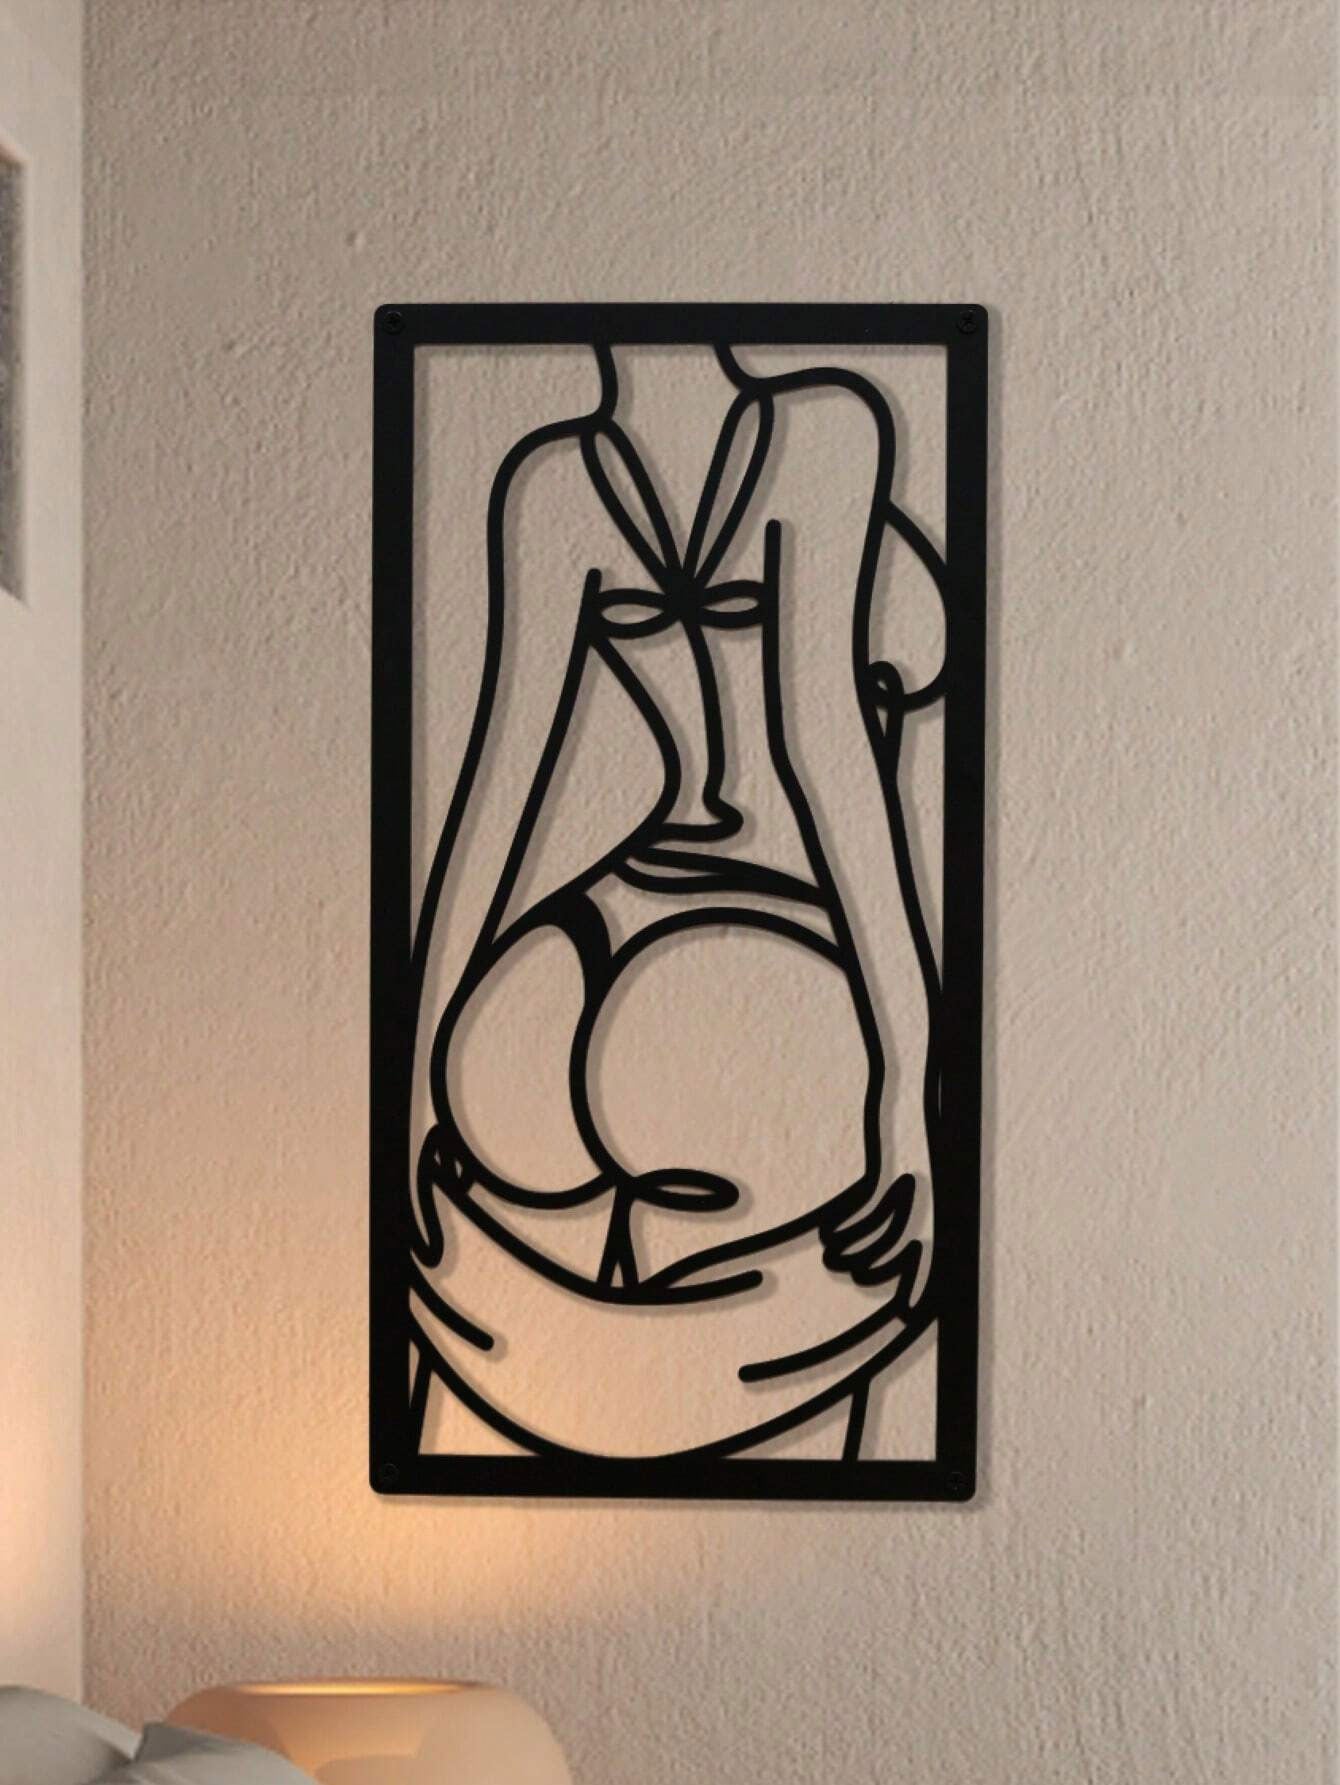 A Beautiful Woman With Half-covered, Half-exposed Body And Curled Buttocks, Metal Wall Art